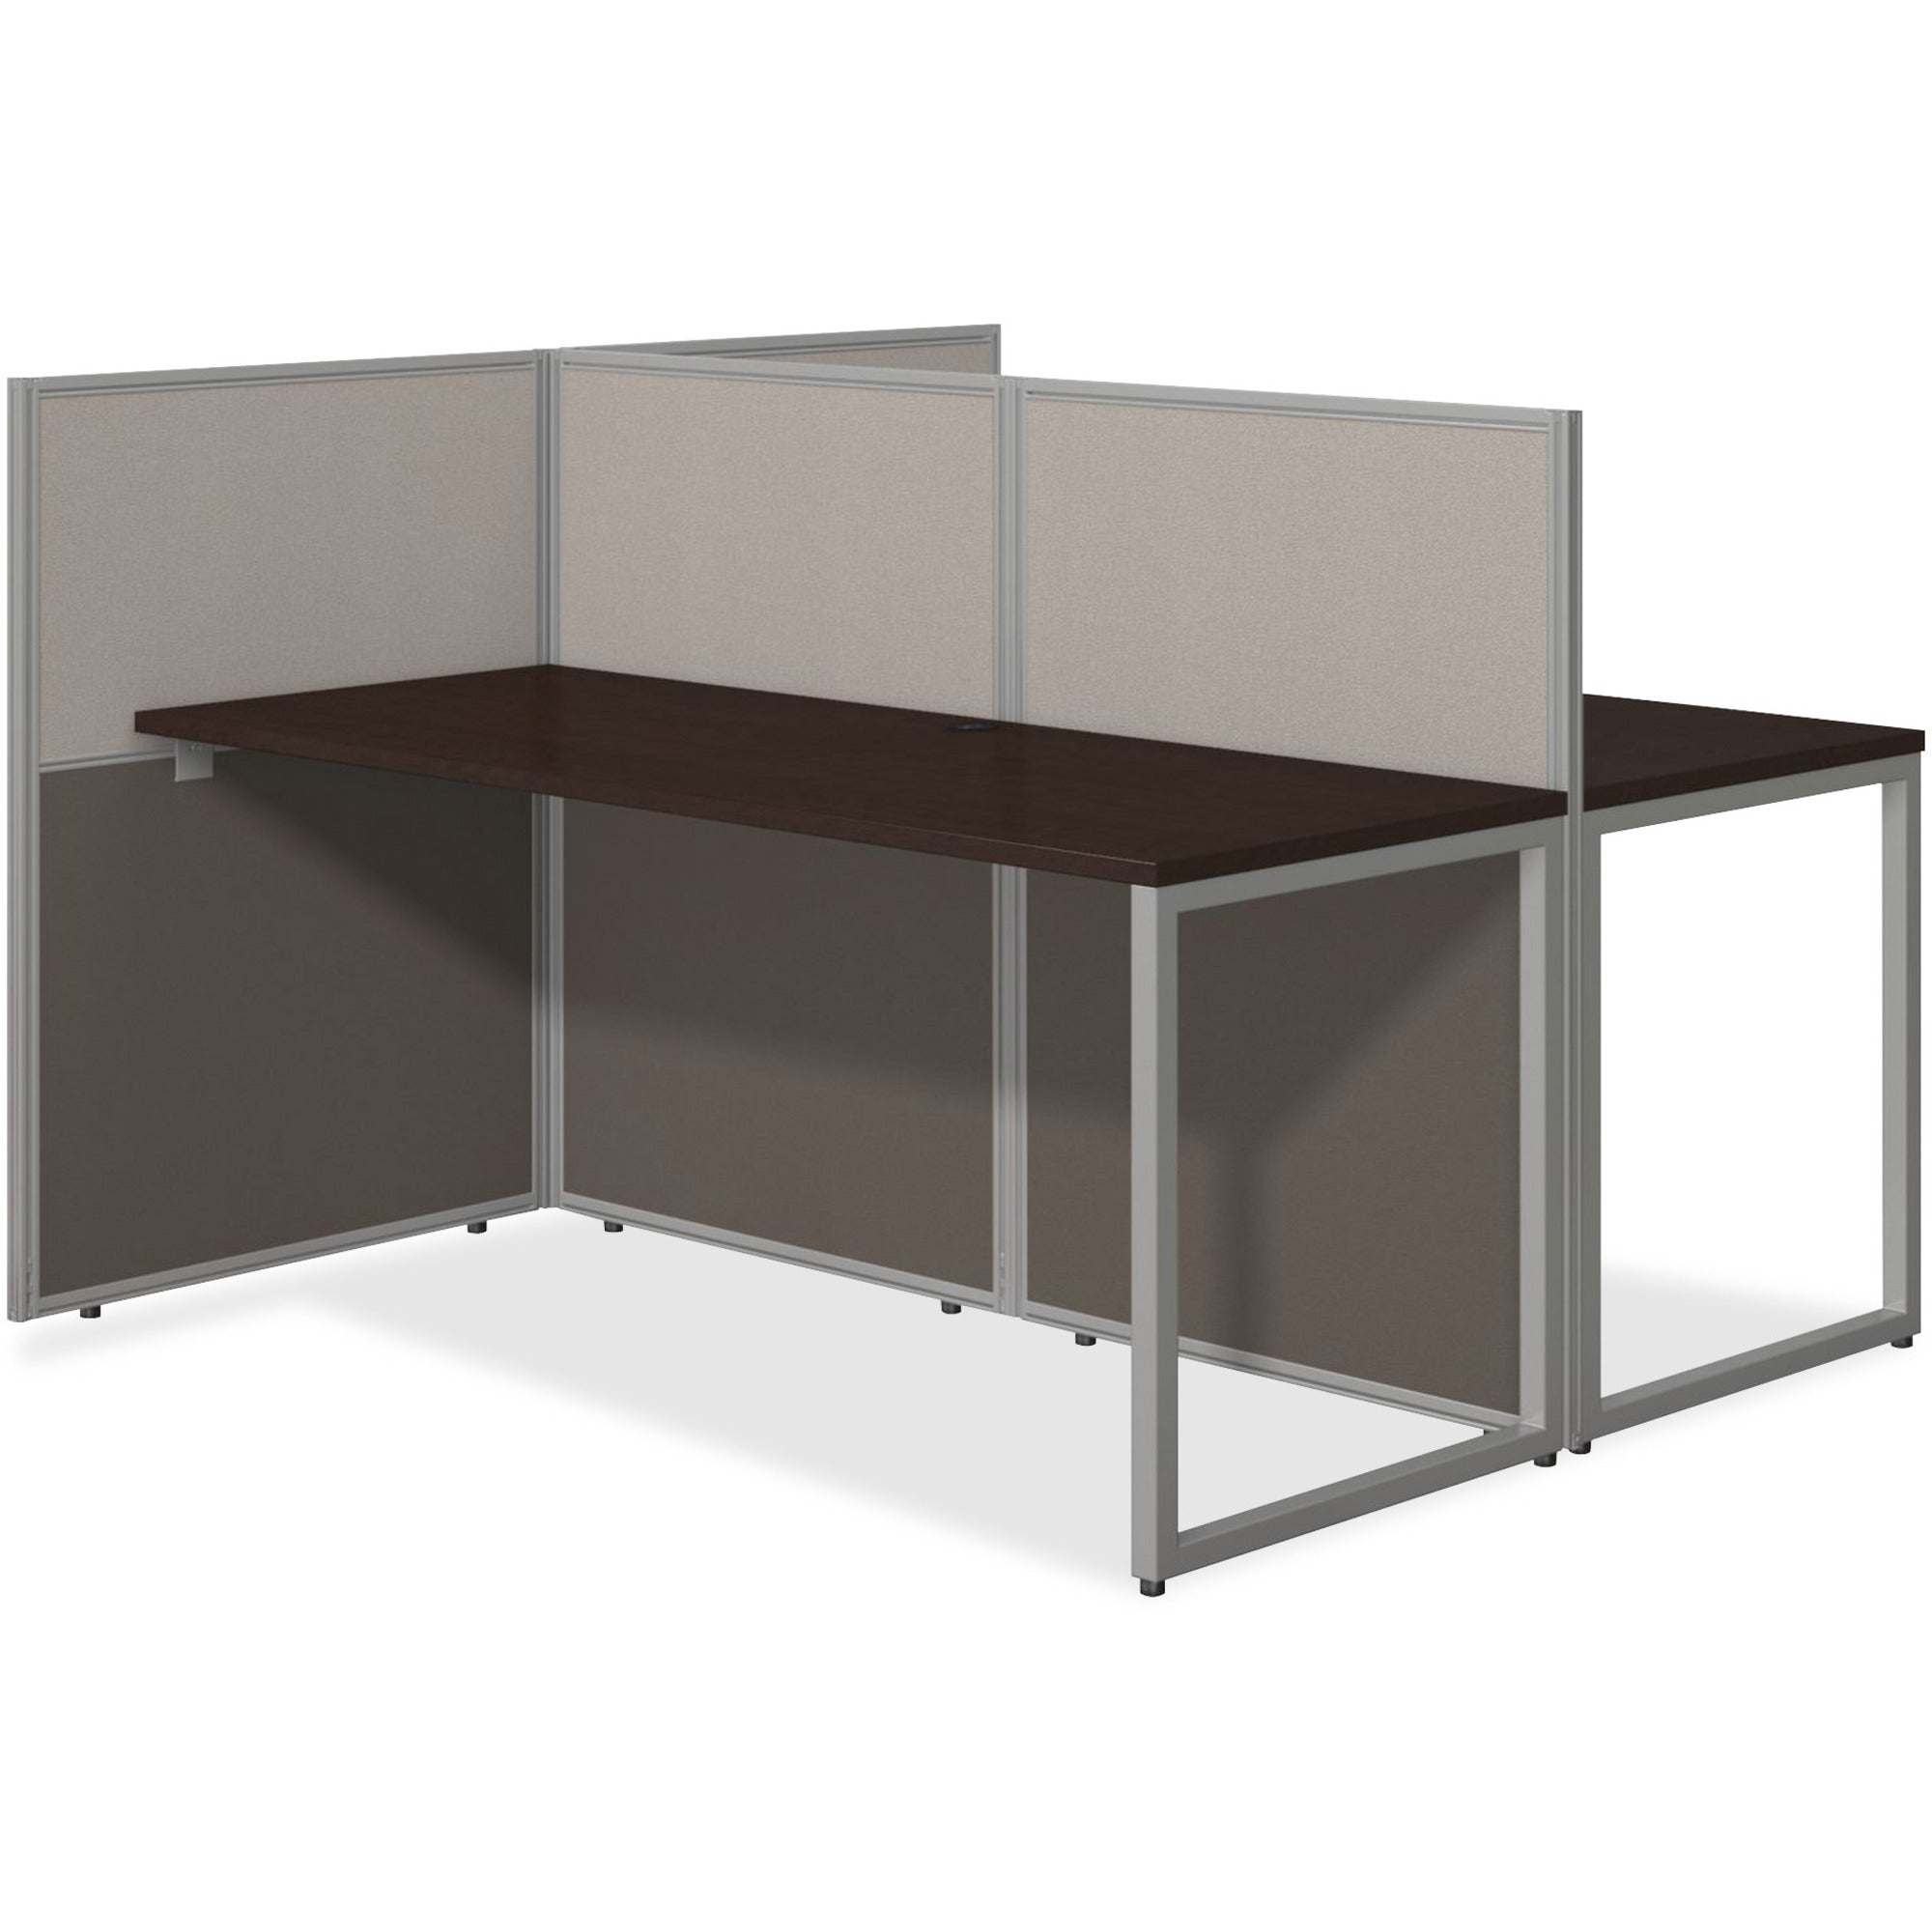 Bush Business Furniture Easy Office 60W 2 Person Straight Desk Open Office - For - Table TopThermofused Laminate (TFL), Mocha Cherry Top x 1" Table Top Thickness - 44.88" Height x 60.04" Width x 60.04" Depth - Assembly Required - Light Gray, Storm Gr - 